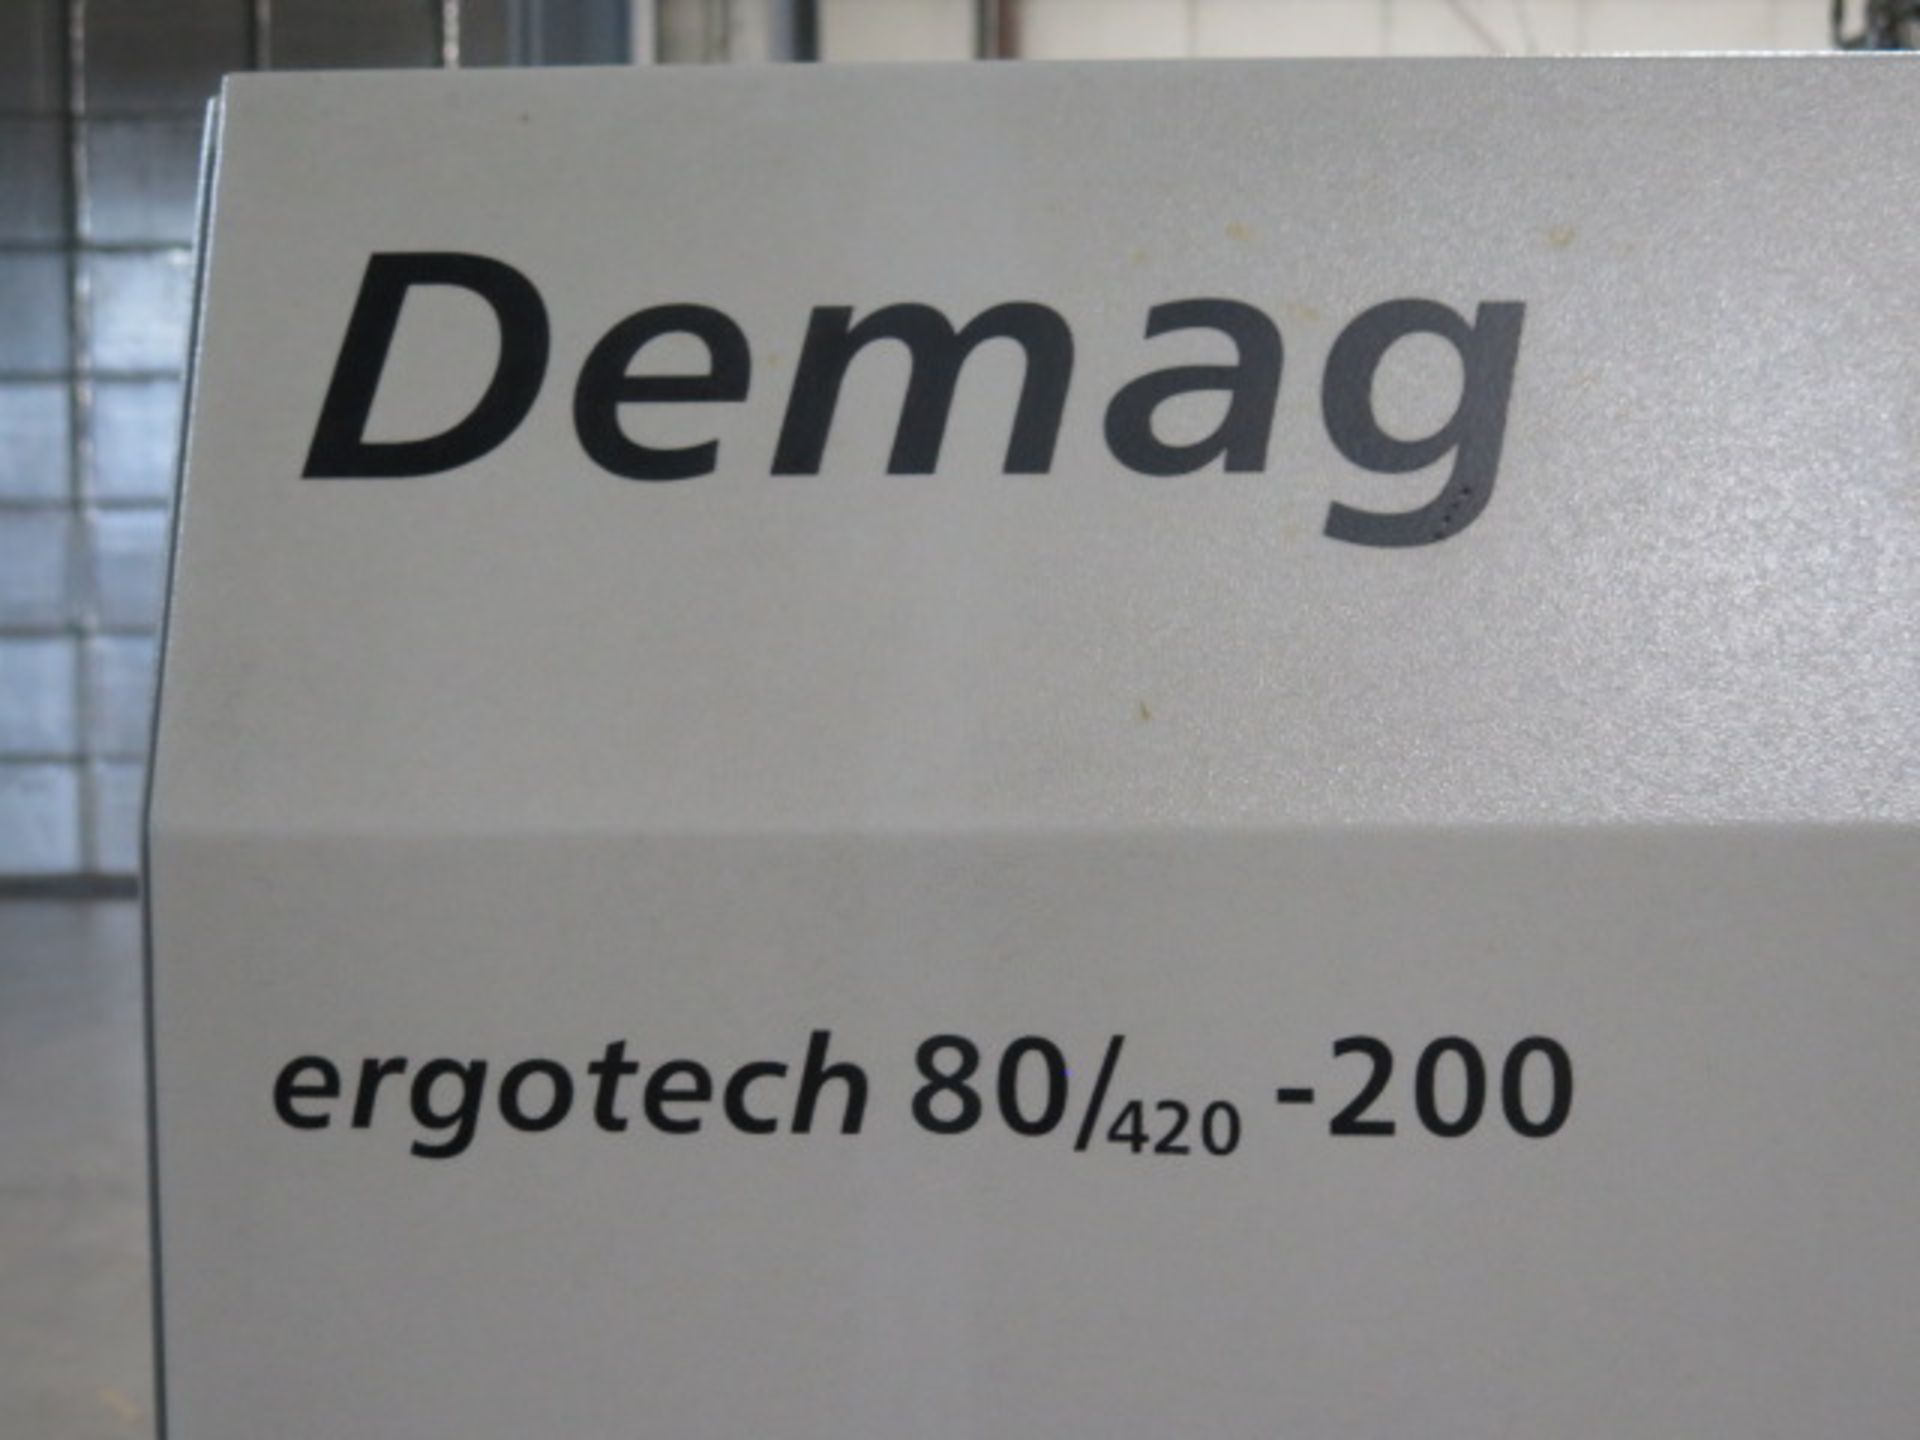 Demag Ergotech 800/420-200 80-Ton Plastic Injection Molding s/n 7153-0016 w/ Demag NC4, SOLD AS IS - Image 17 of 20